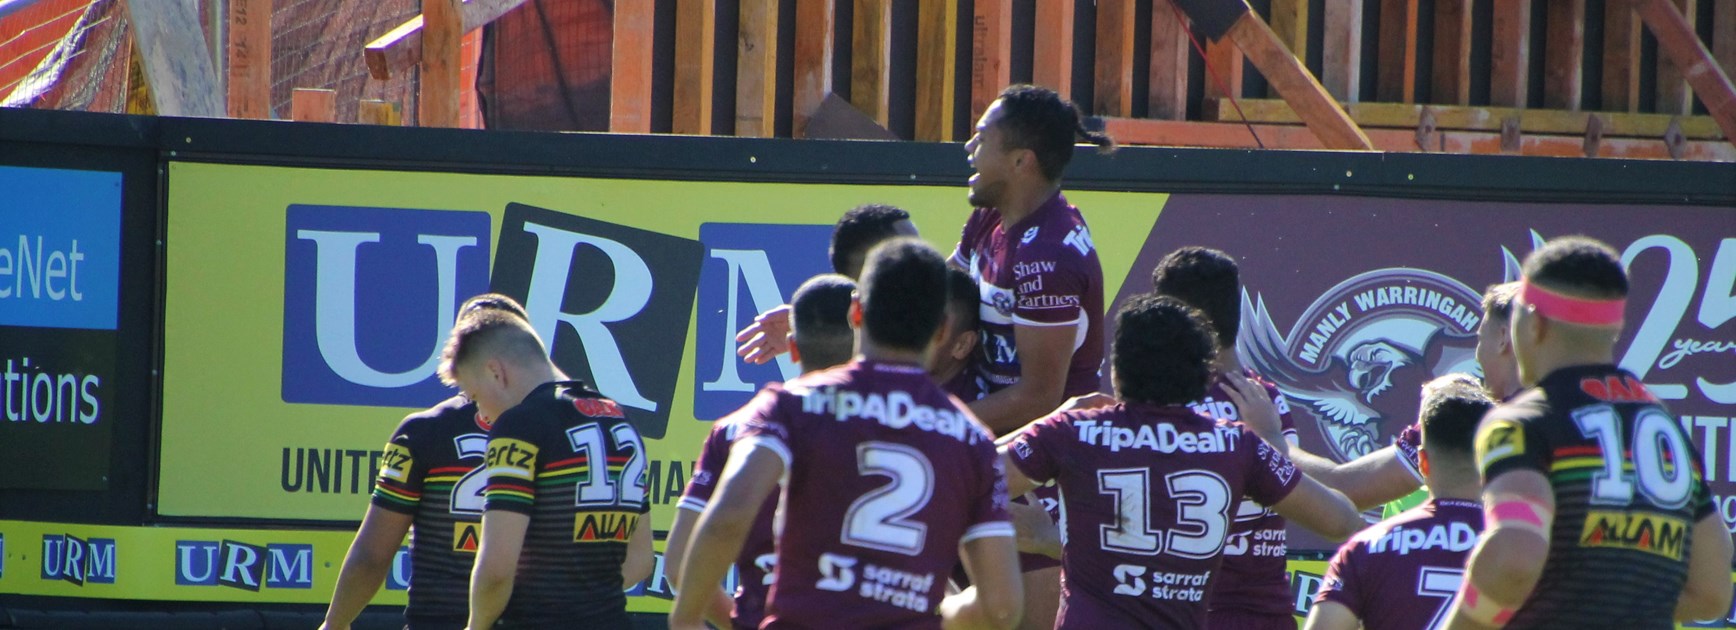 Sea Eagles crush Panthers to move to top of ladder